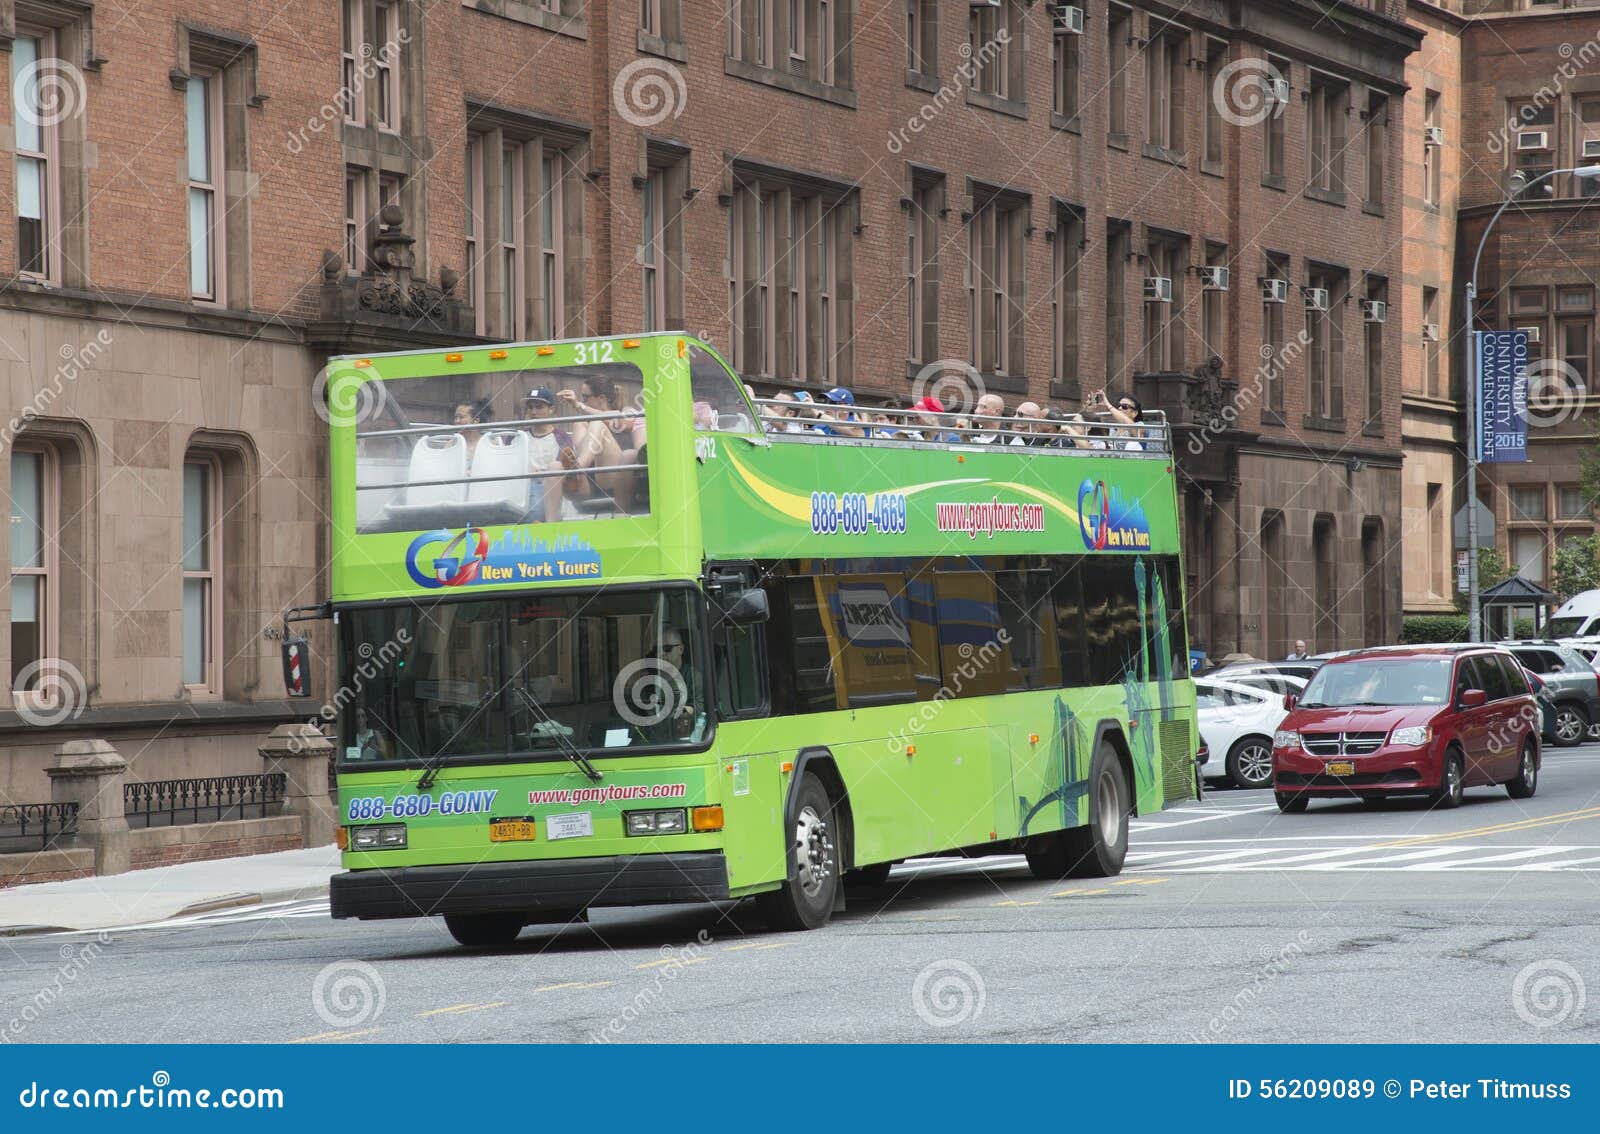 Tour bus in New York USA editorial stock image. Image of vehicle - 56209089